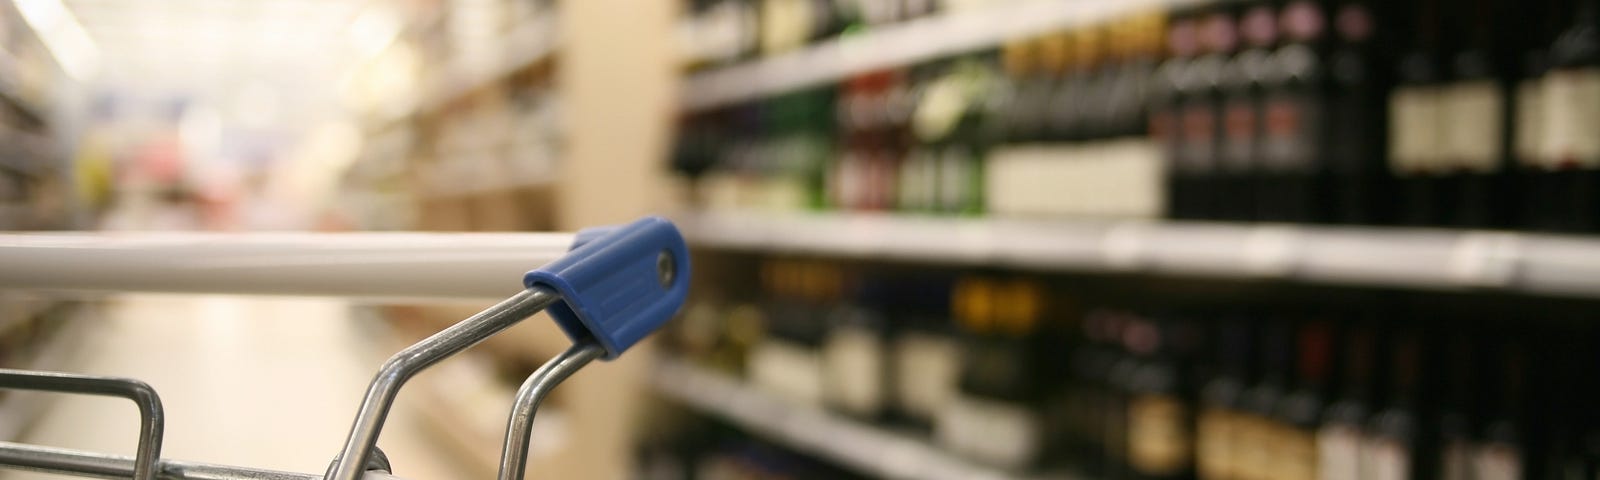 Close-up image of a shopping cart with a soft out-of-focus background of a wine aisle at a grocery store